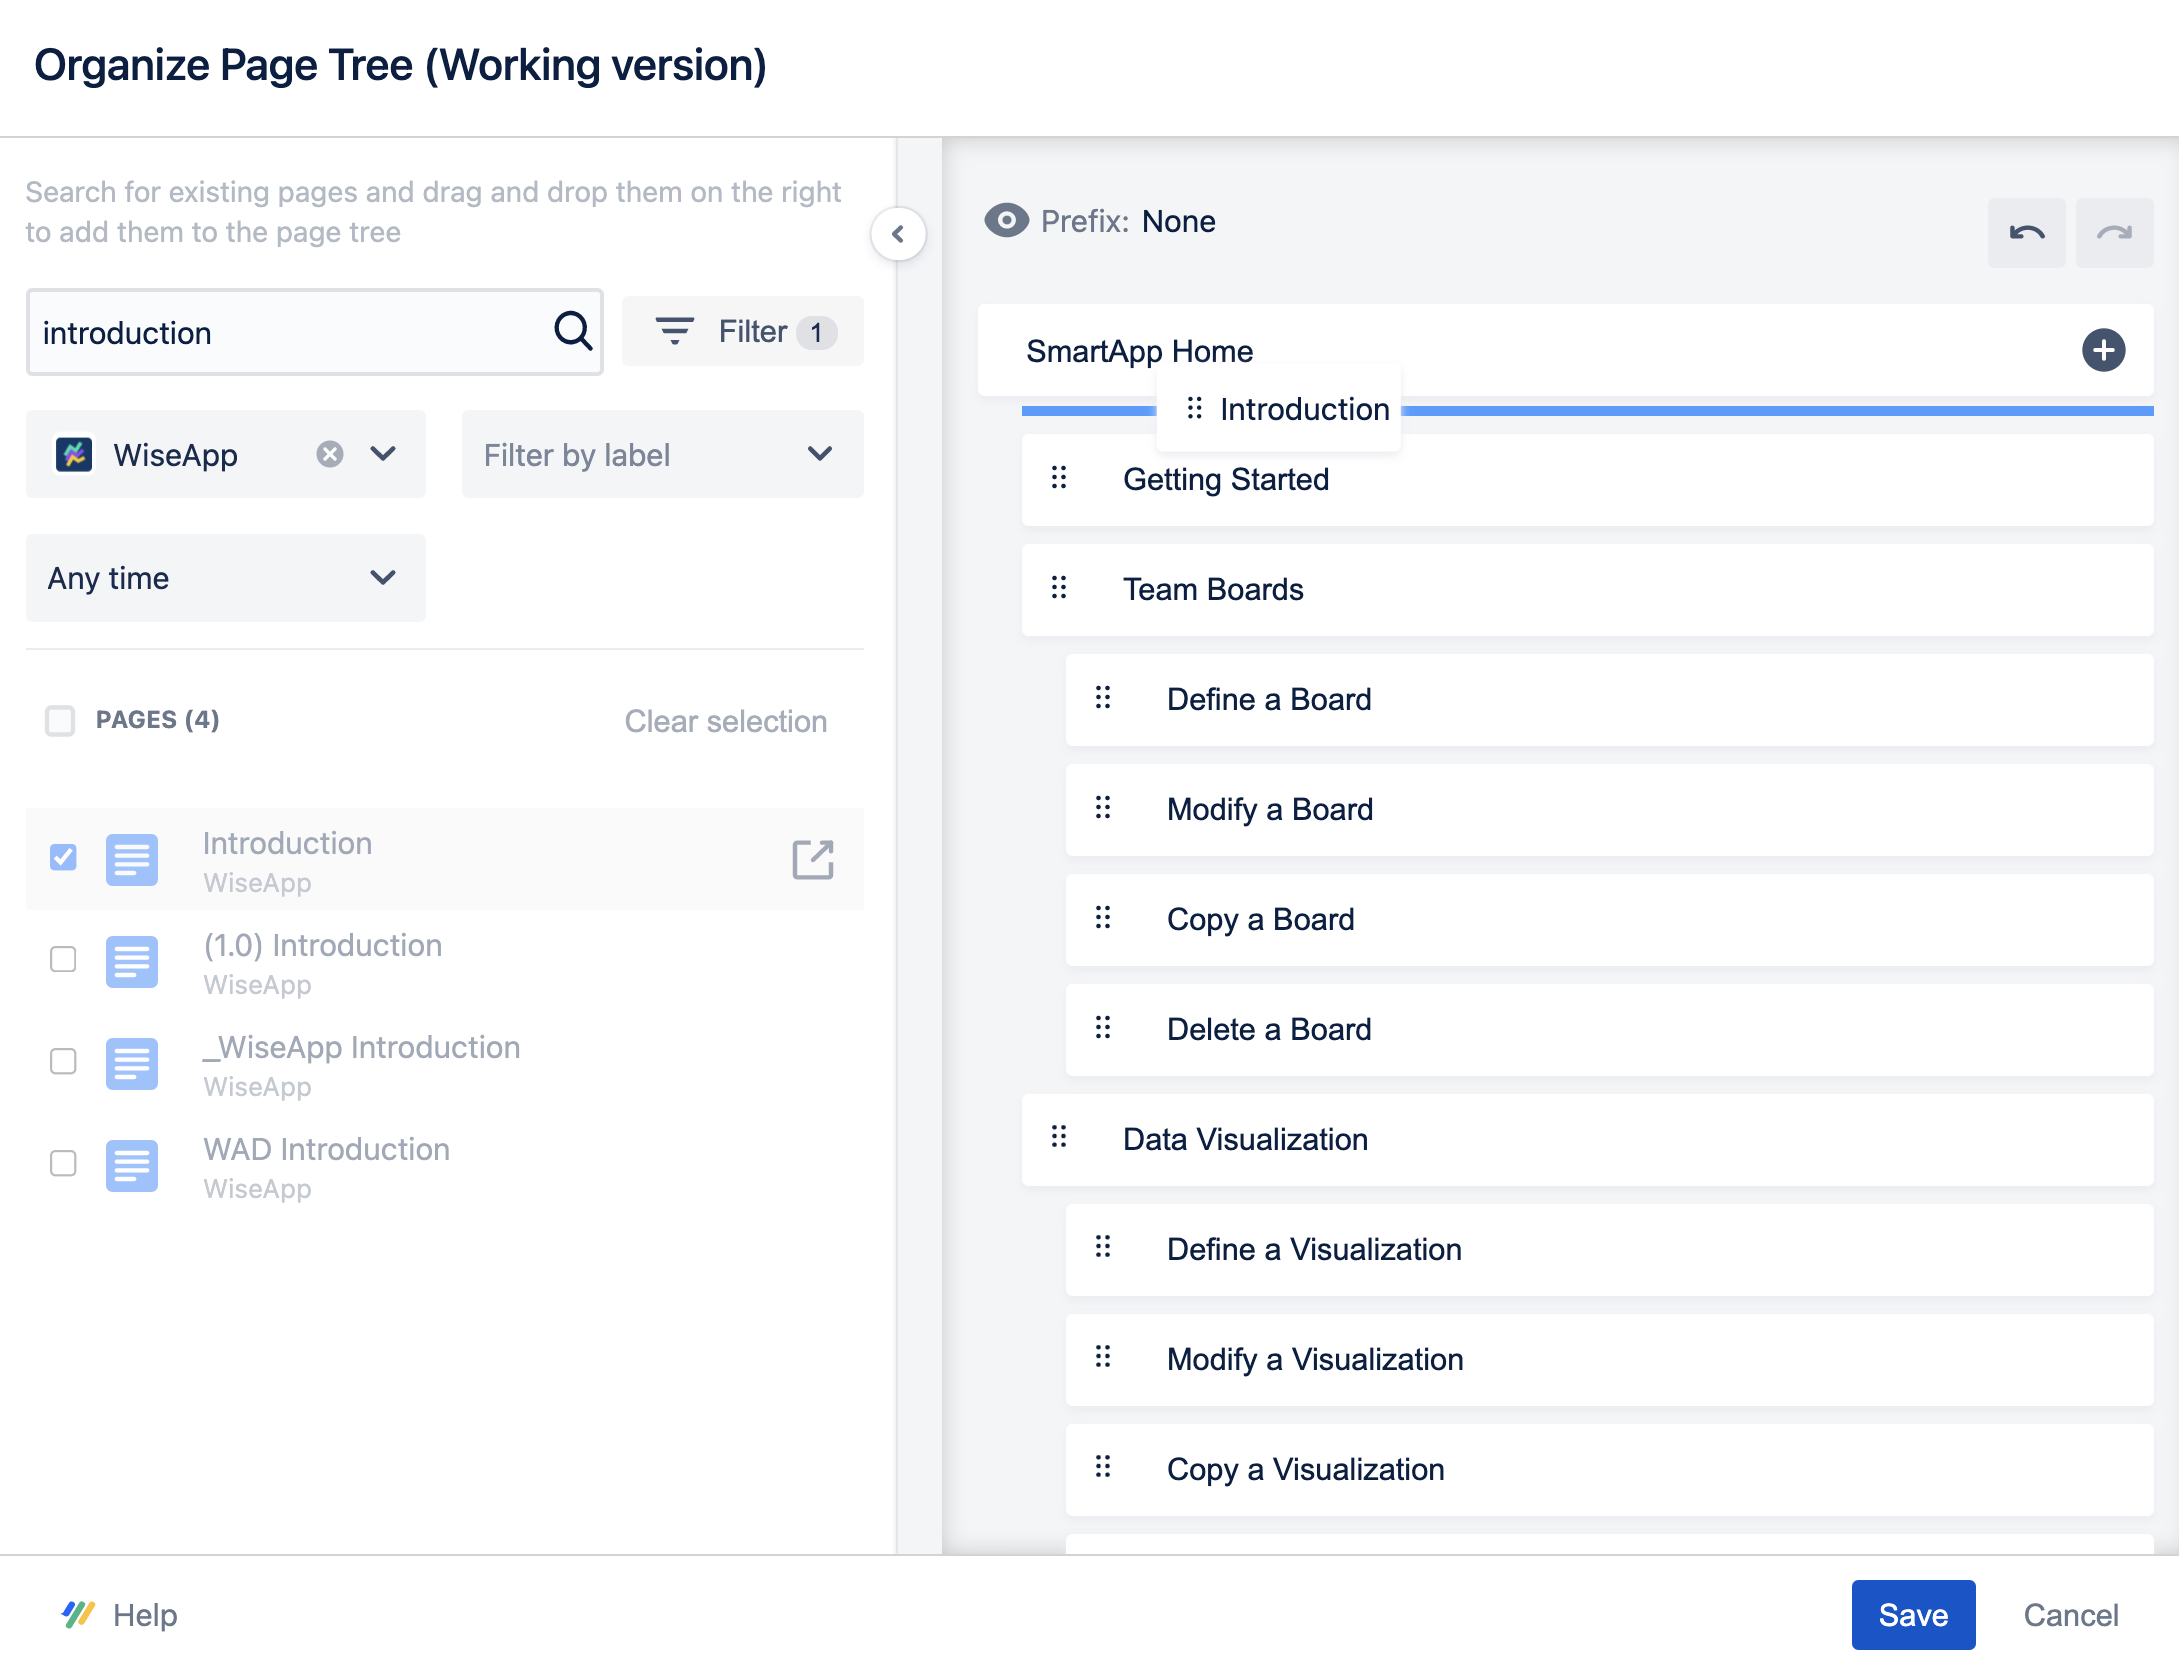 Organize page tree add an existing page